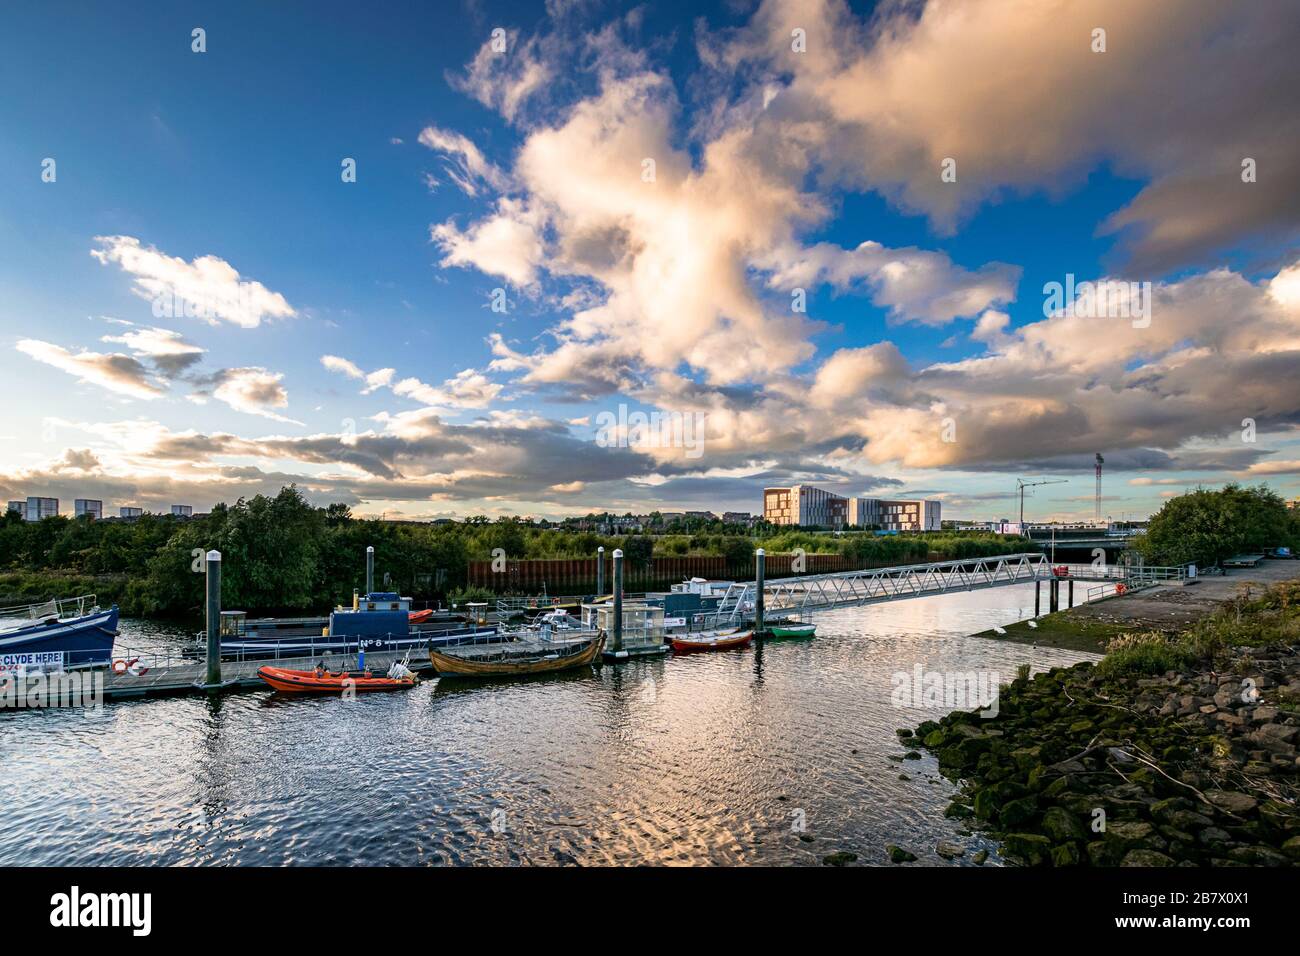 Govan Ferry jetty on River Clyde at sunset with blocks of flats on the horizon. Wide angle urban scene. Stock Photo